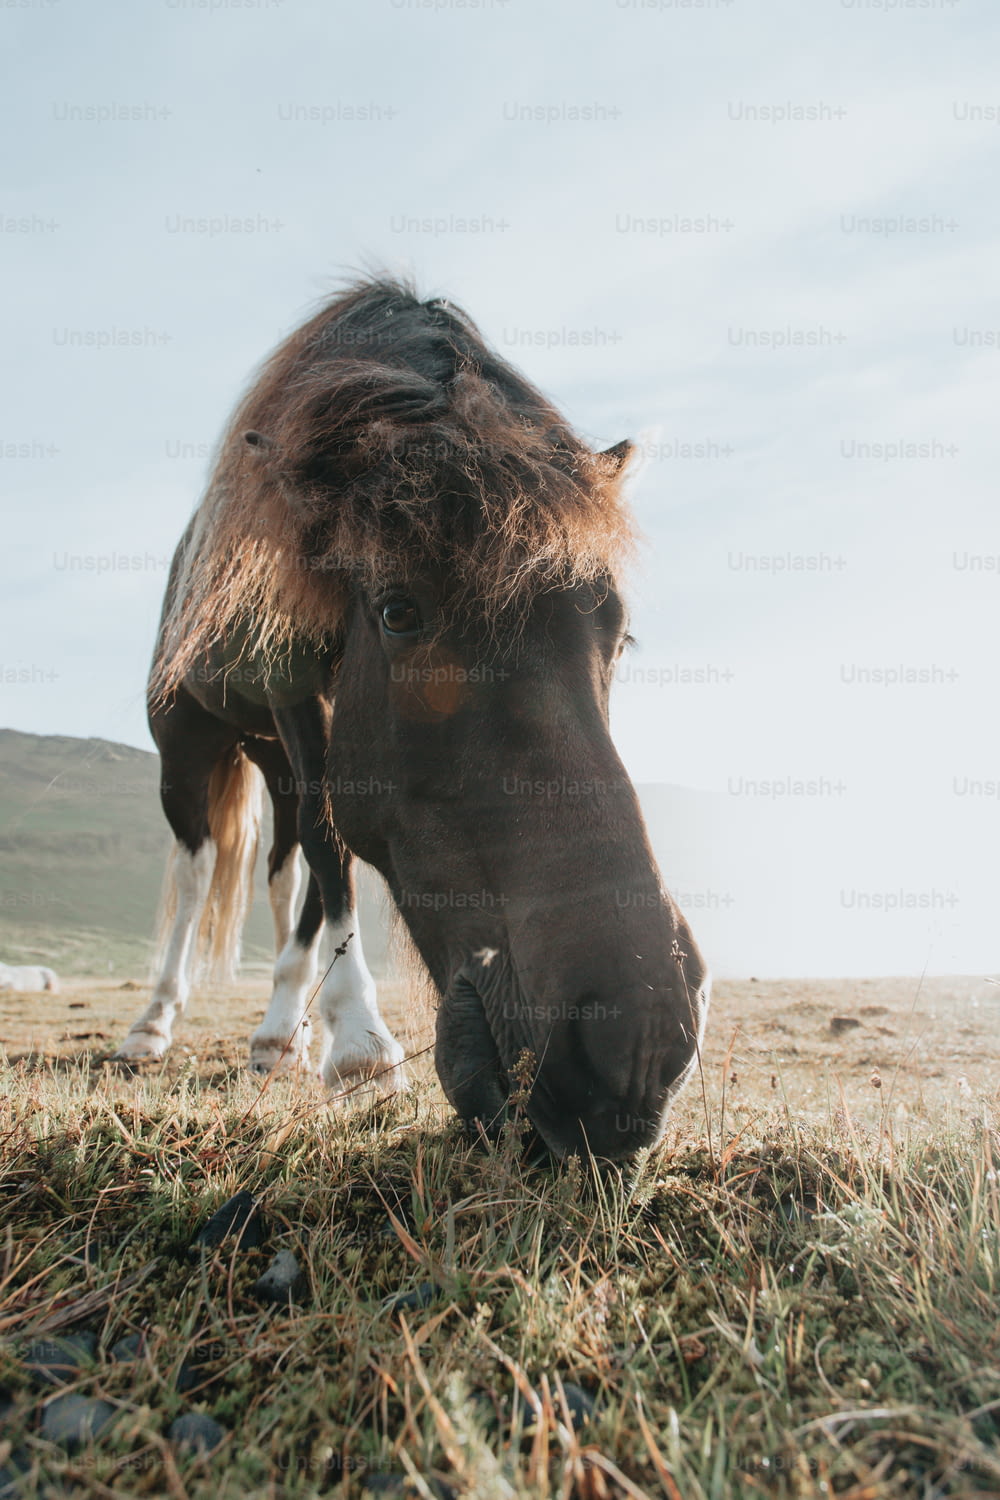 a horse eating grass in a field with mountains in the background